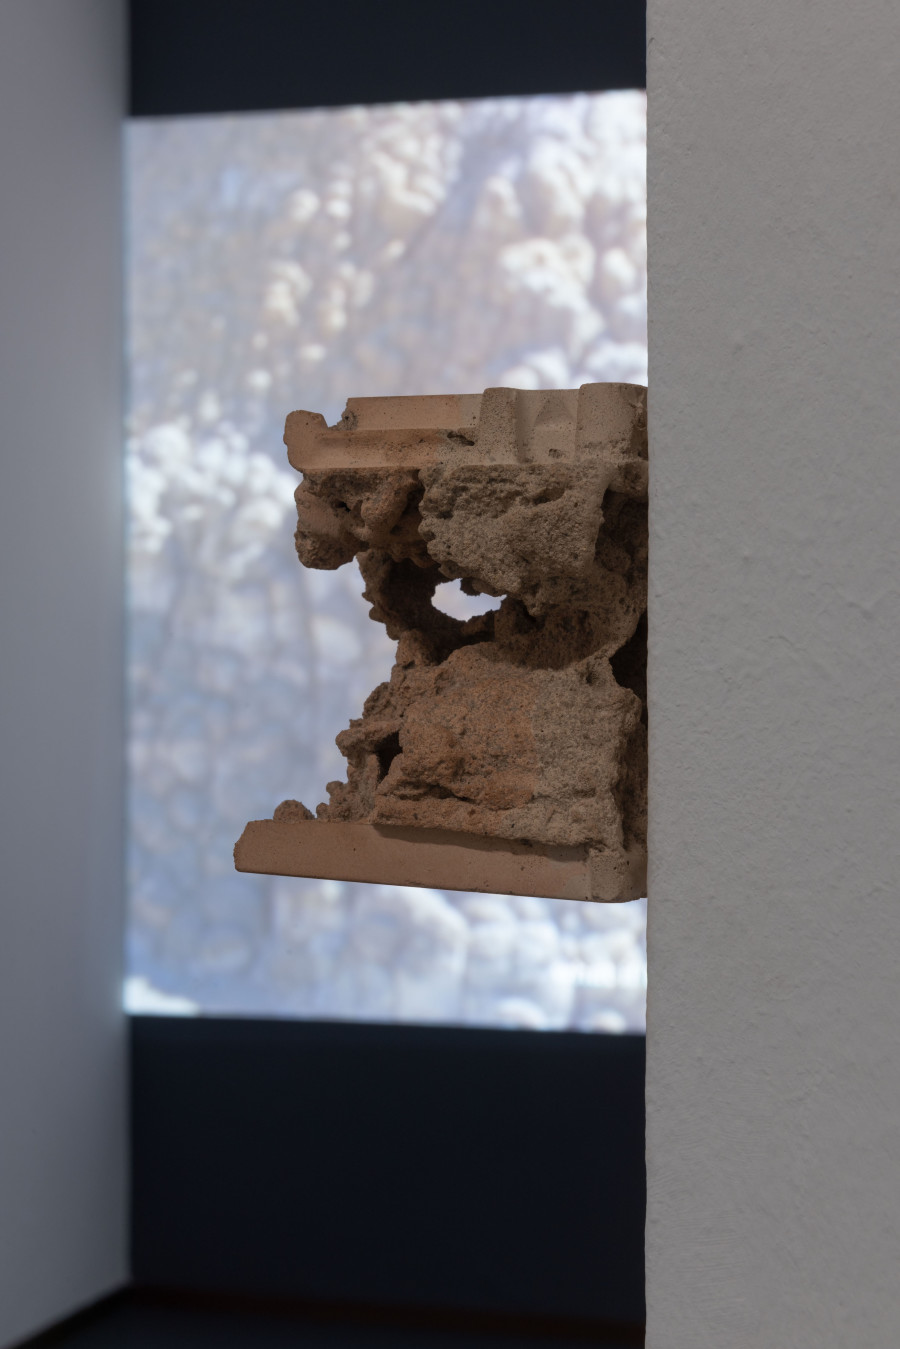 Hunter Longe, Dissolution of the State II, installation view, 2022, Sediments from the Suze and Fiolle rivers, lime, plaster, sand, magnetite, pigments. Photo: Mattia Angelini